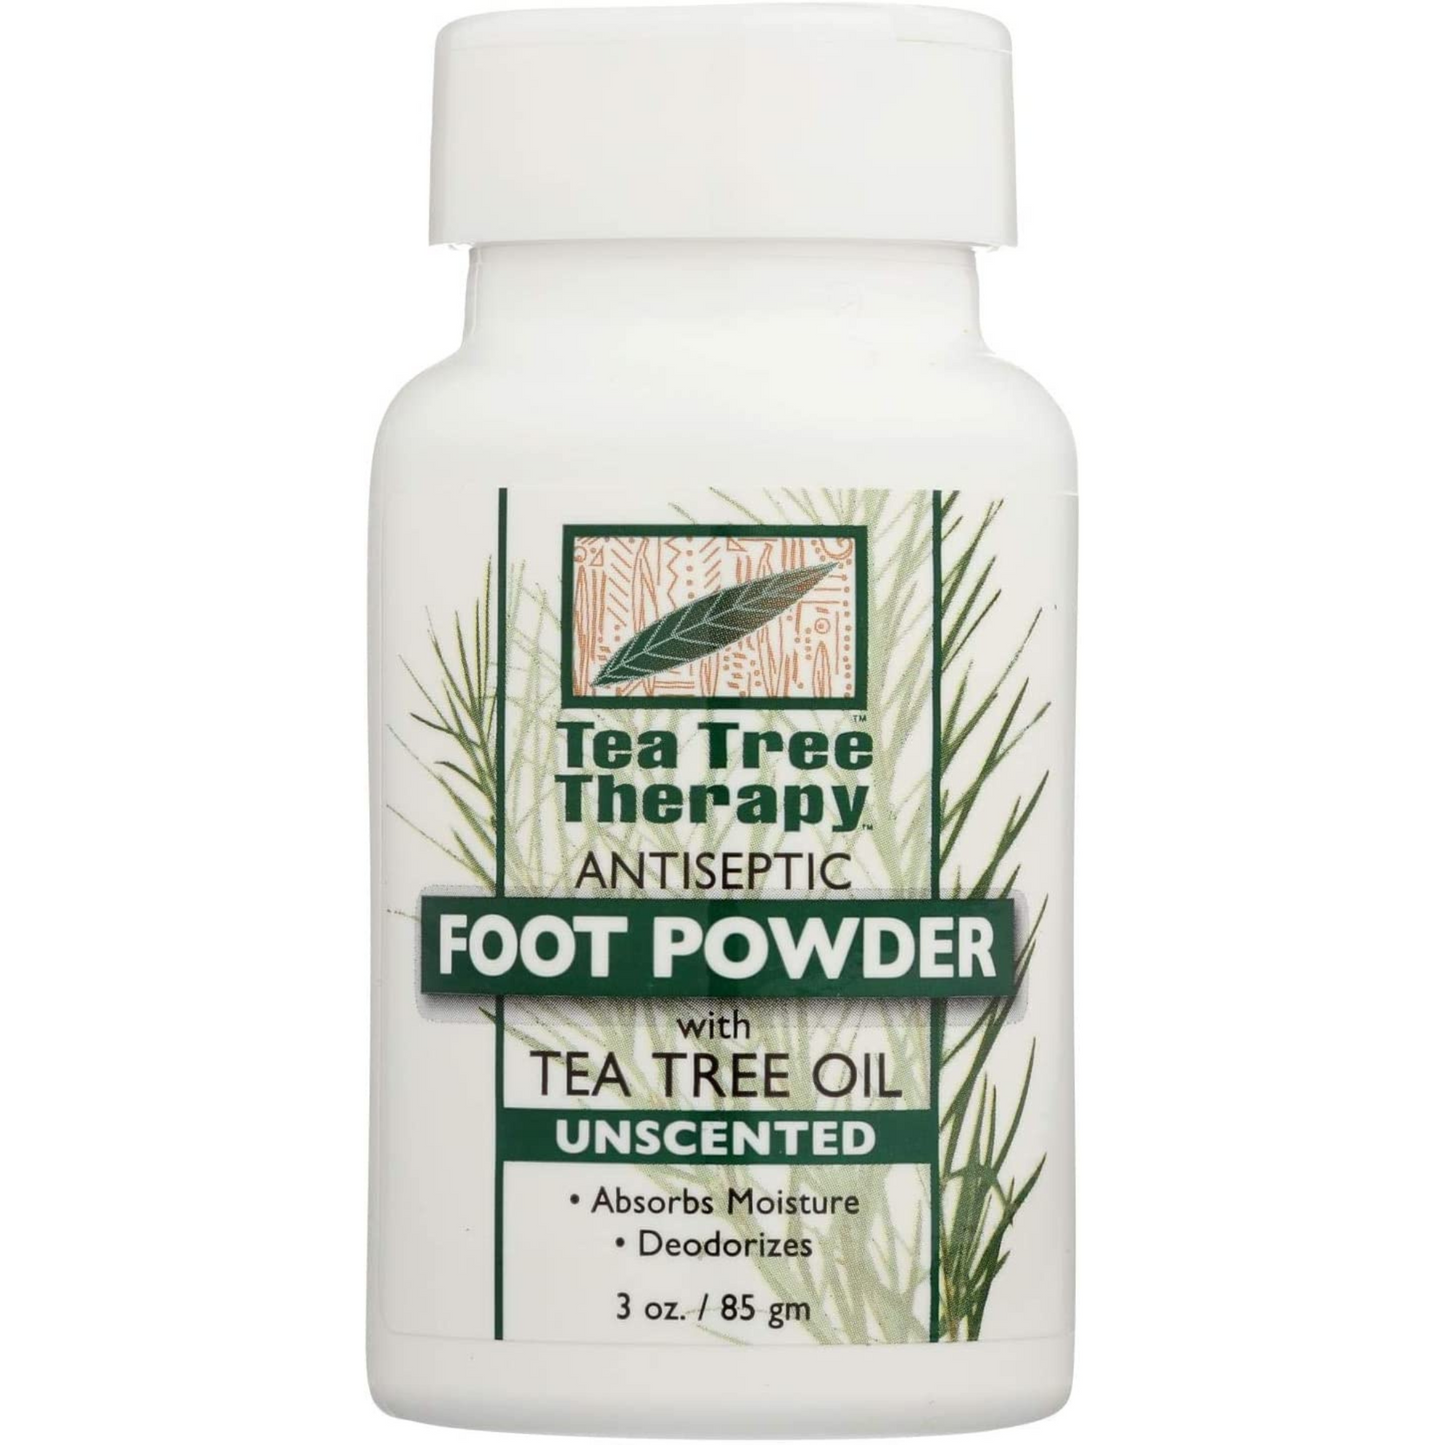 Primary Image of Tea Tree Therapy Unscented Antiseptic Foot Powder (3 oz) 